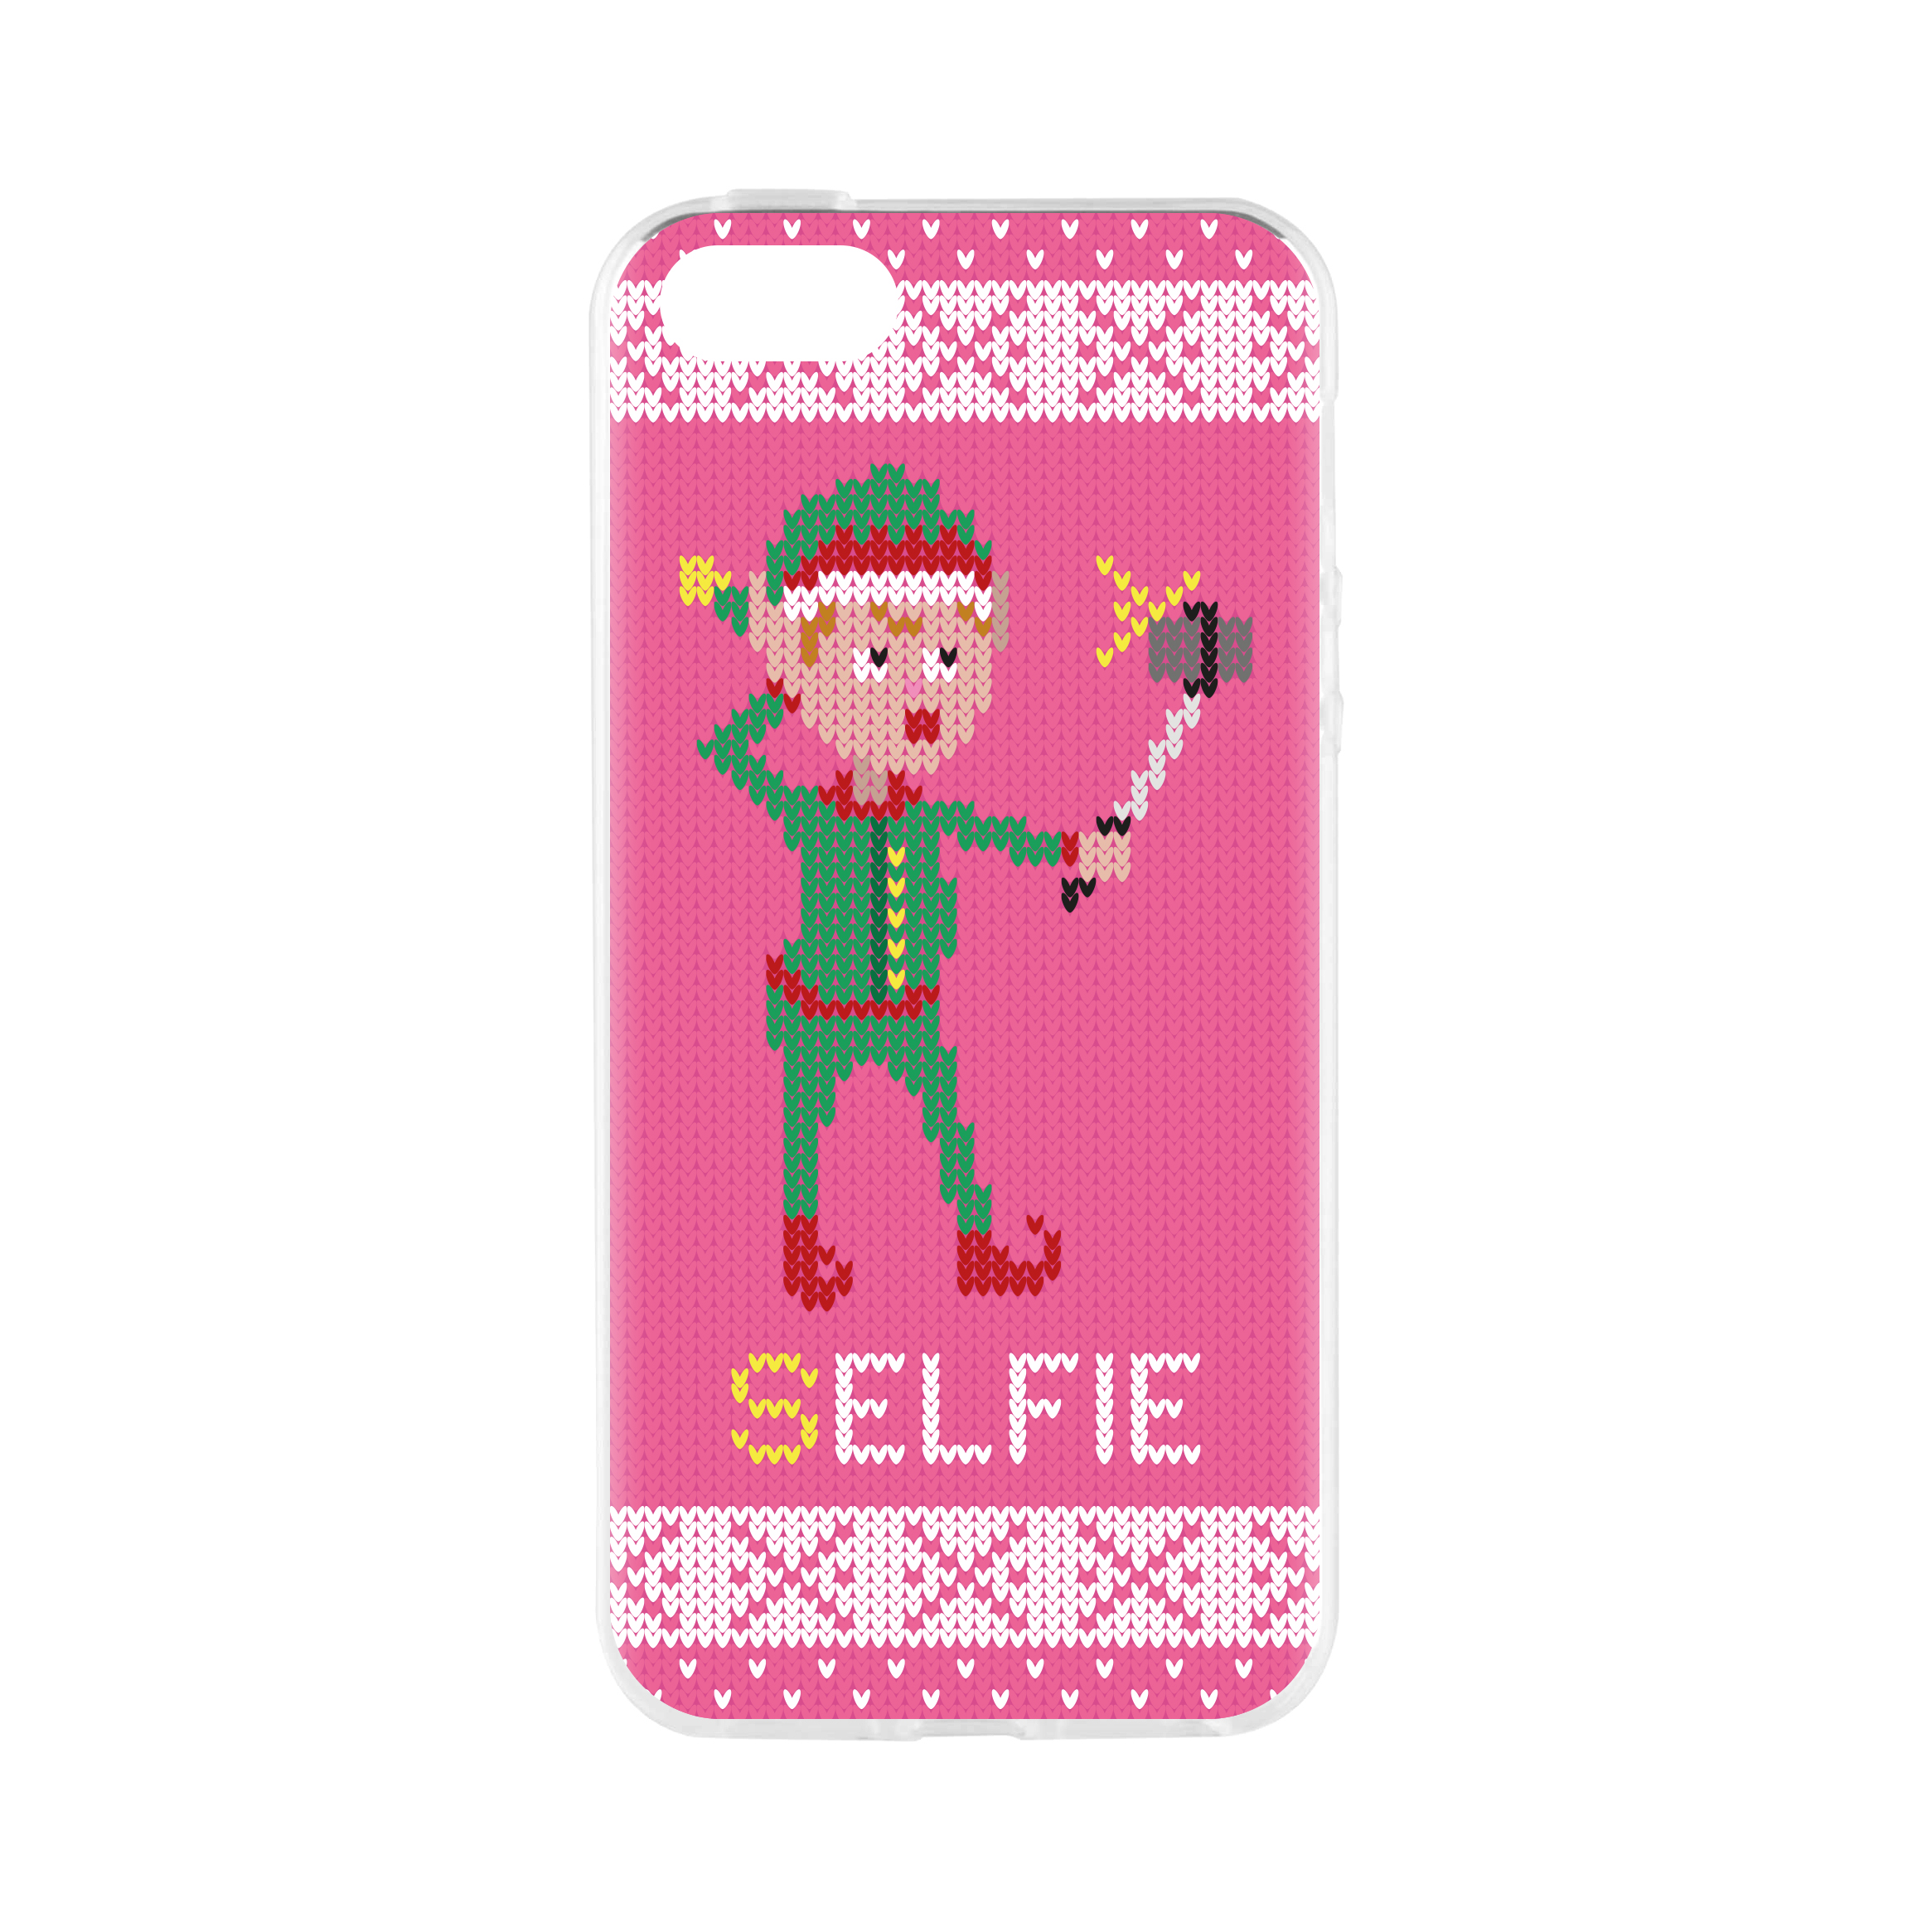 Ugly Backcover, IPHONE Selfie Elfie, FLAVR Case APPLE, COLOURFUL 5/5S/SE, Xmas Sweater